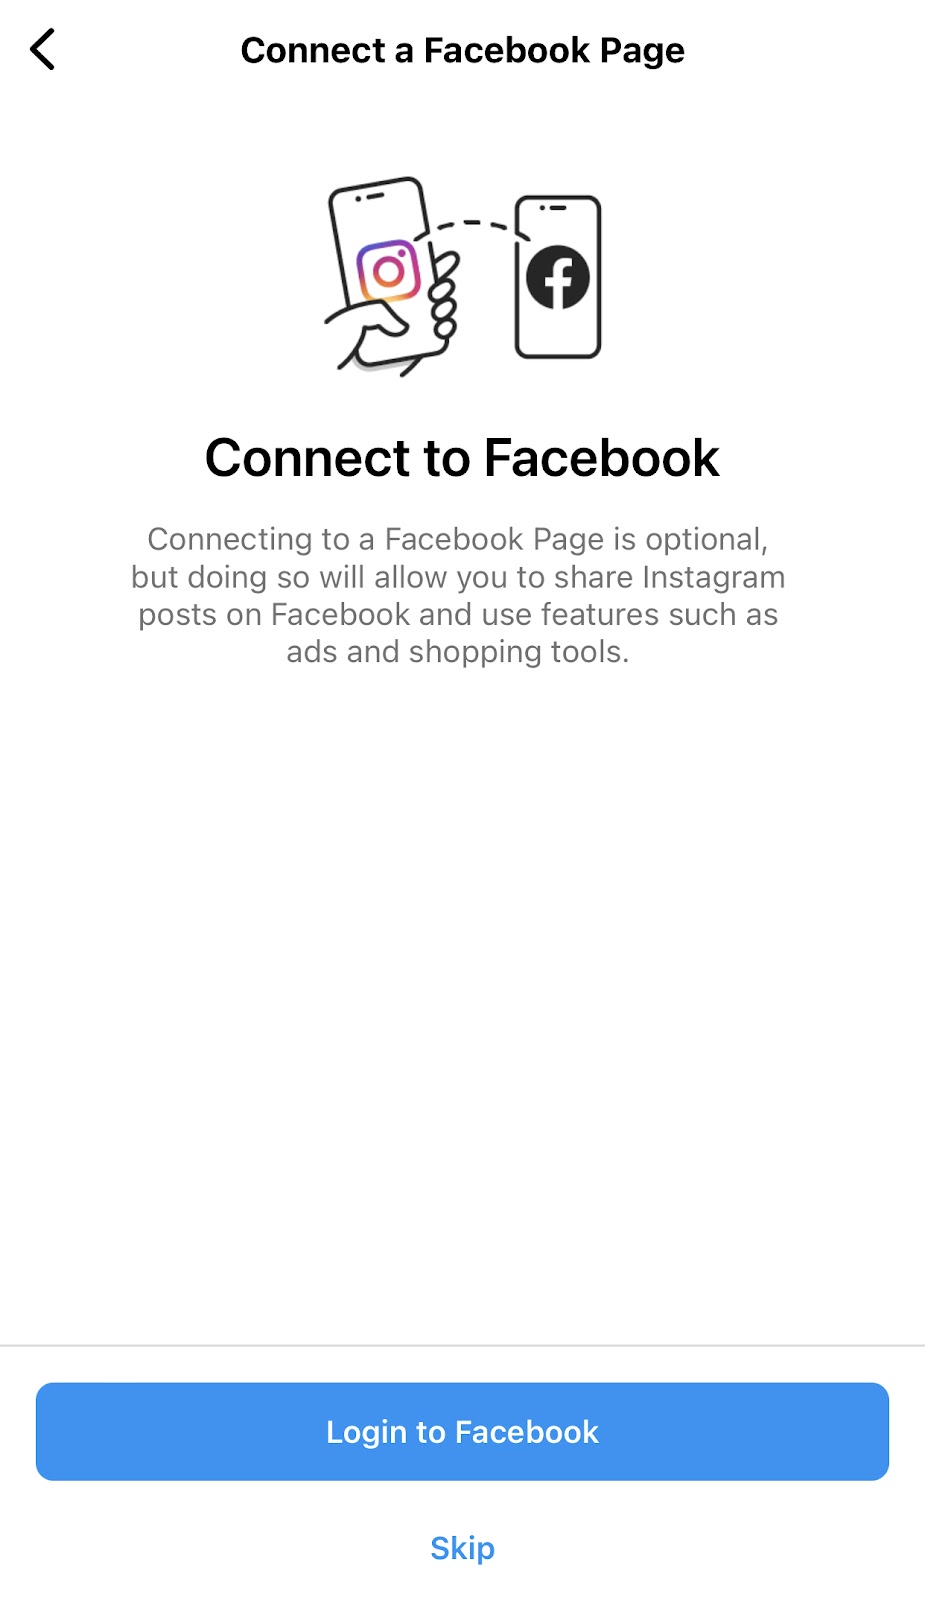 Connect to a Facebook Page